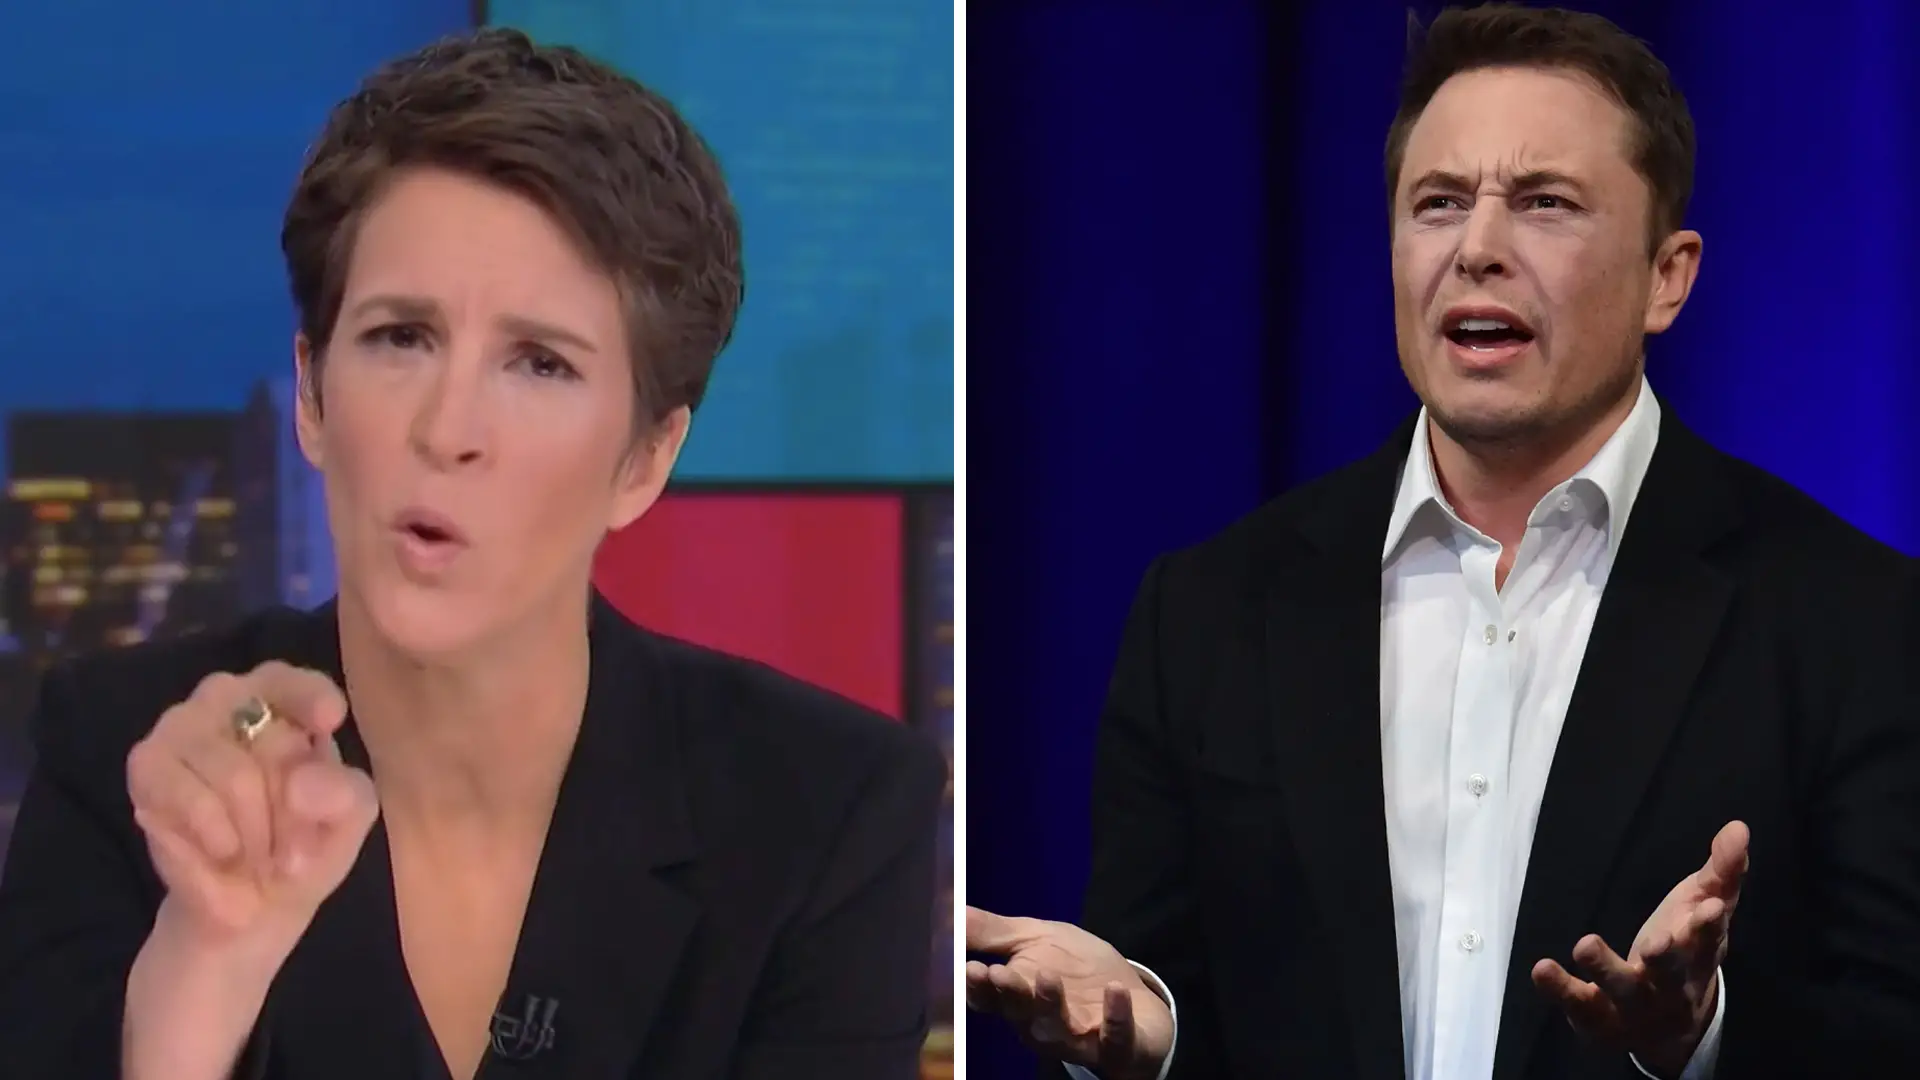 Rachel Maddow Sues Elon Musk for “Taking Away Her Safe Space”